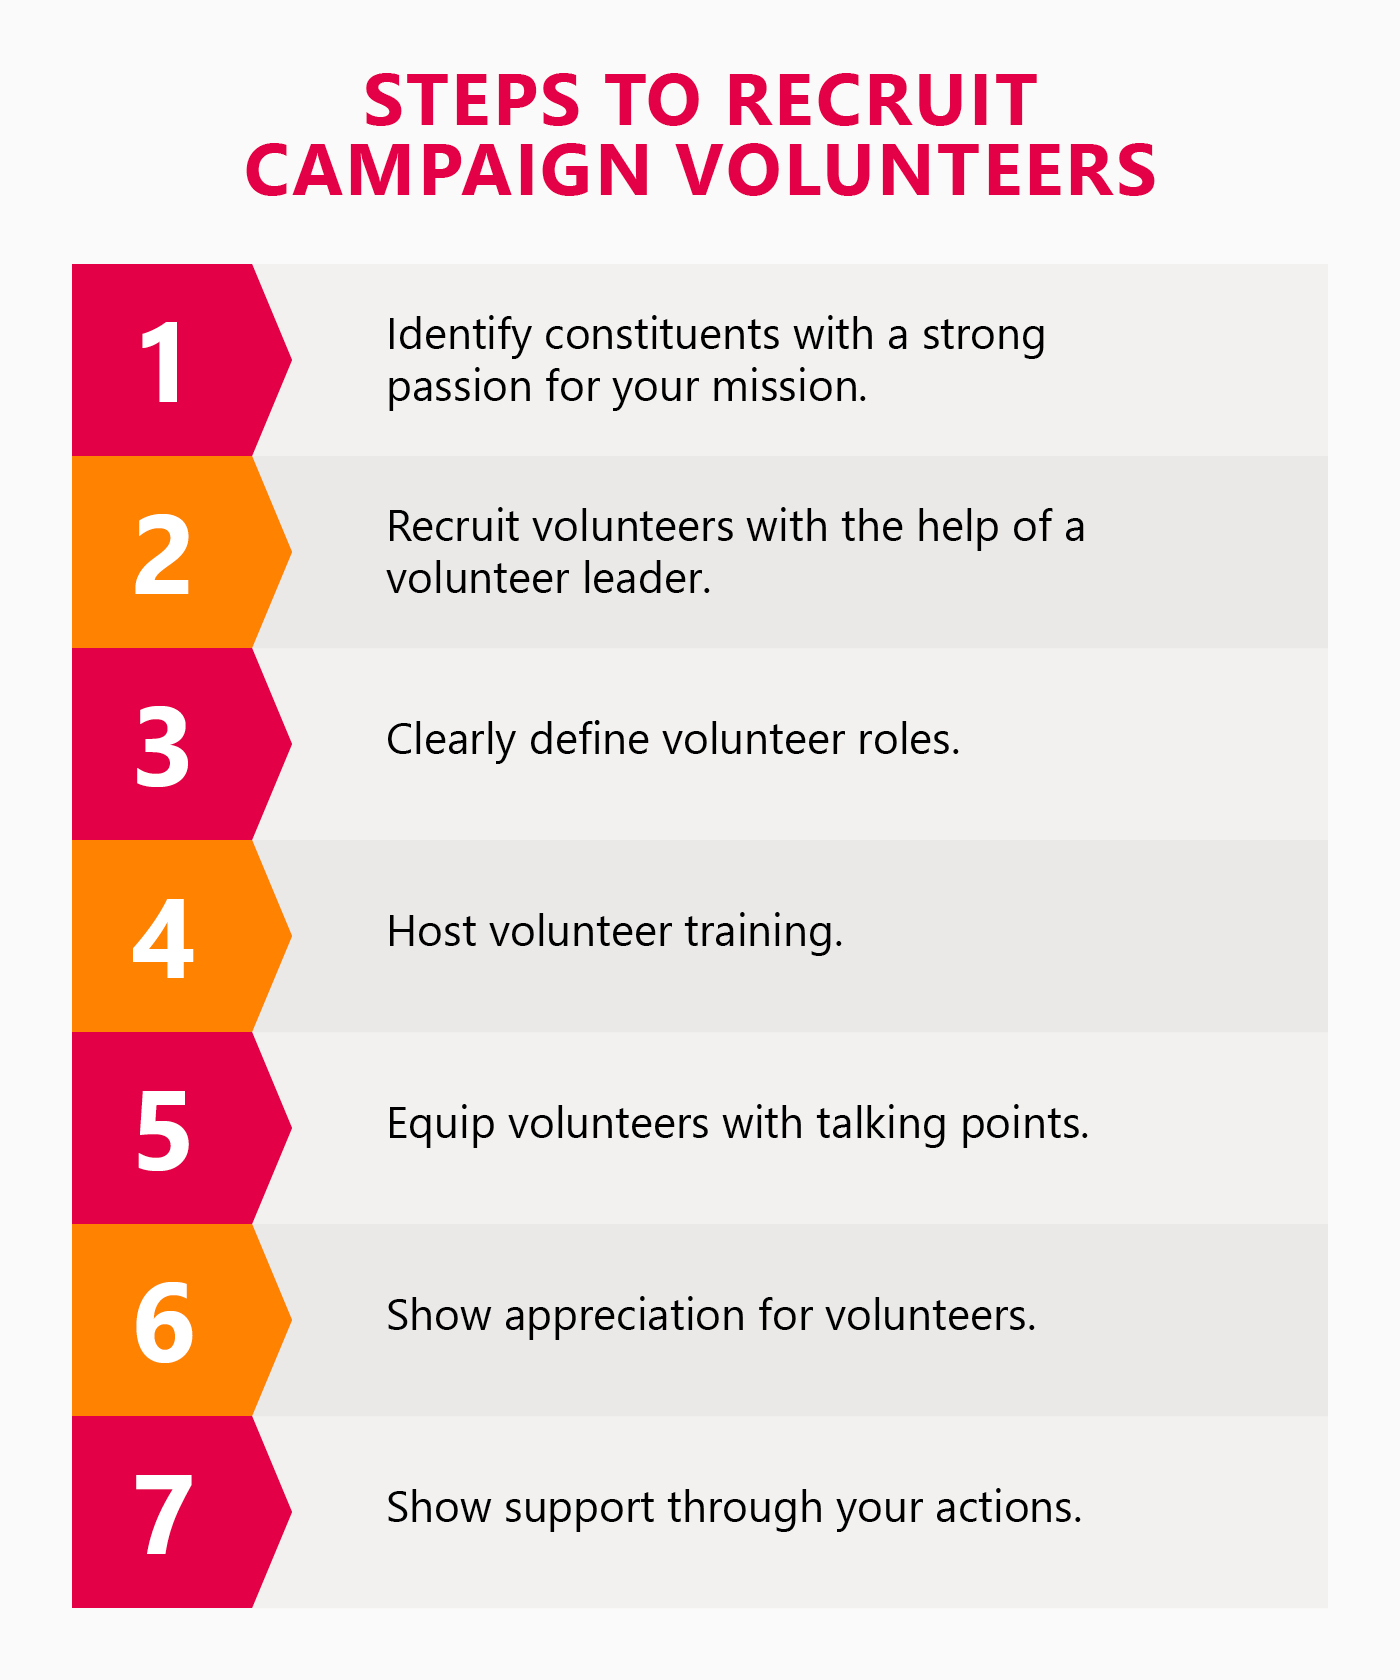 Steps to recruit comprehensive campaign volunteers (explained in the list below) 